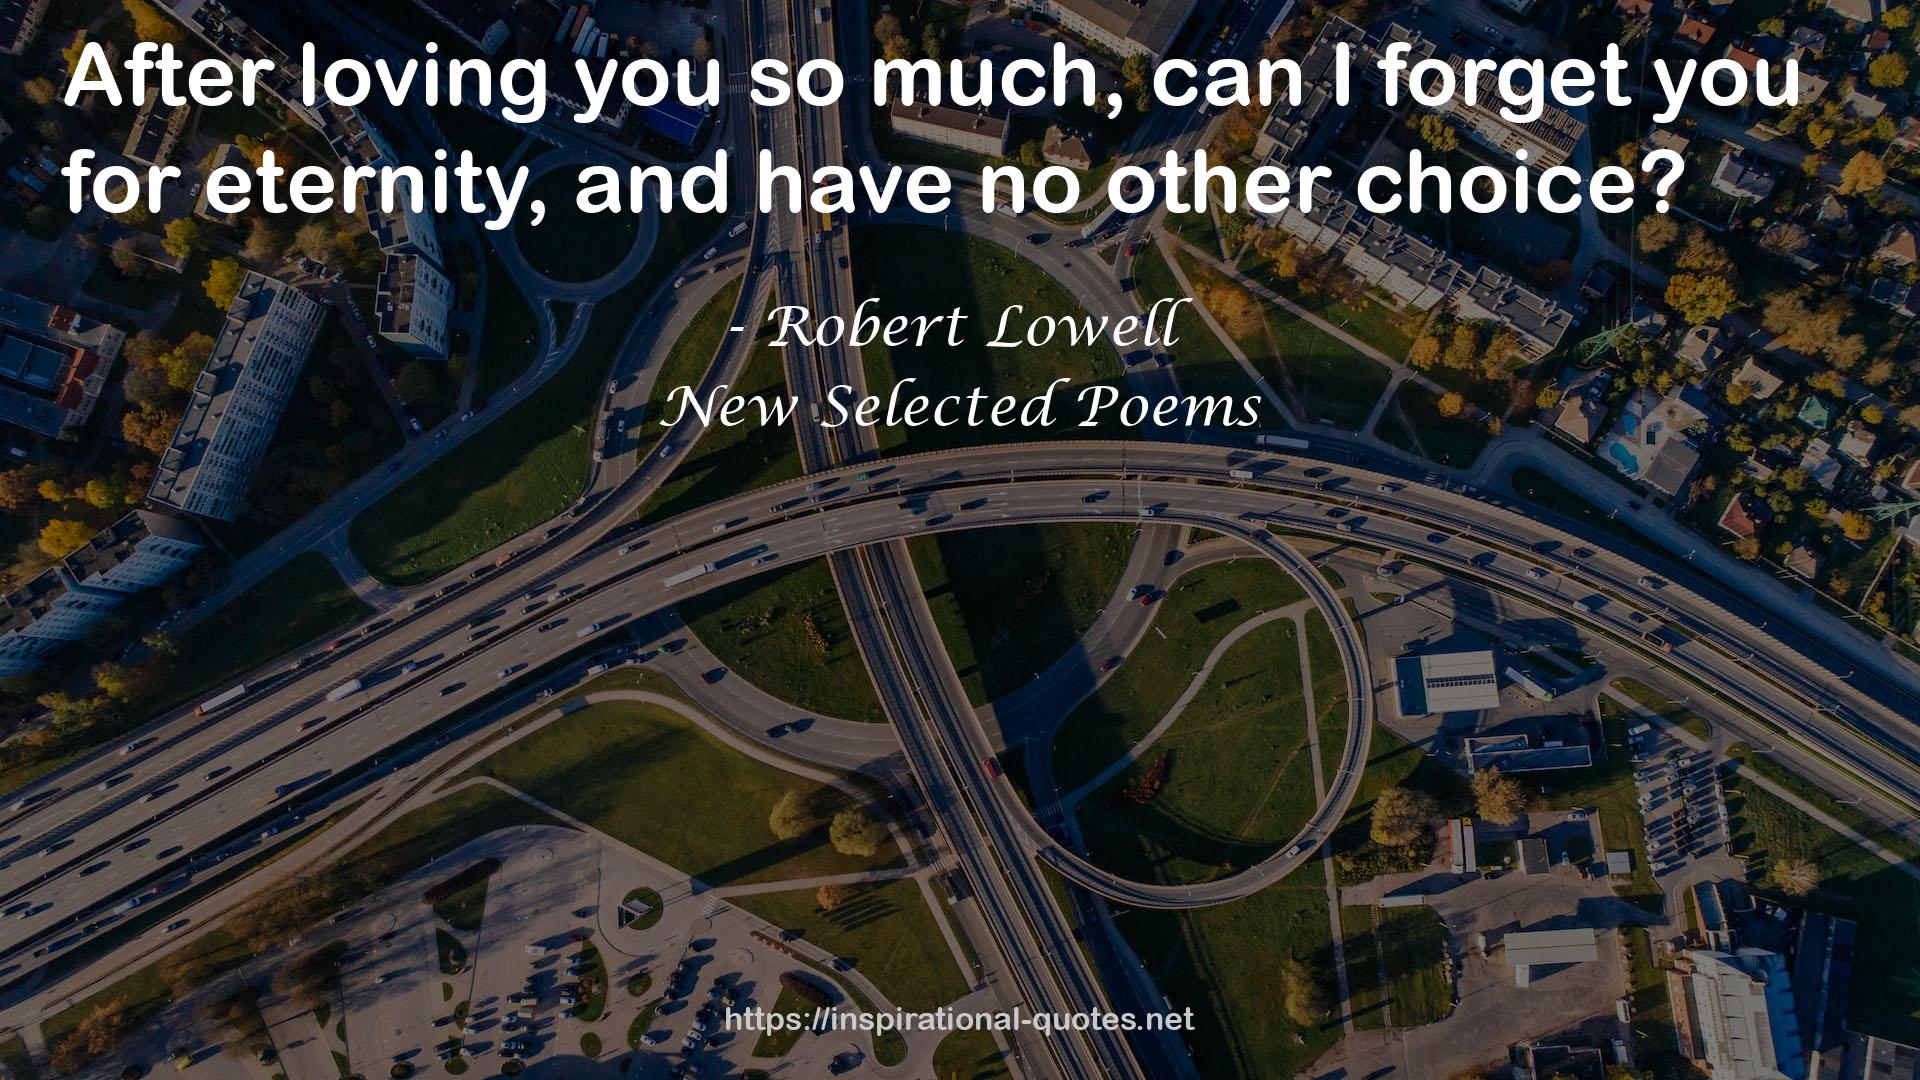 Robert Lowell QUOTES